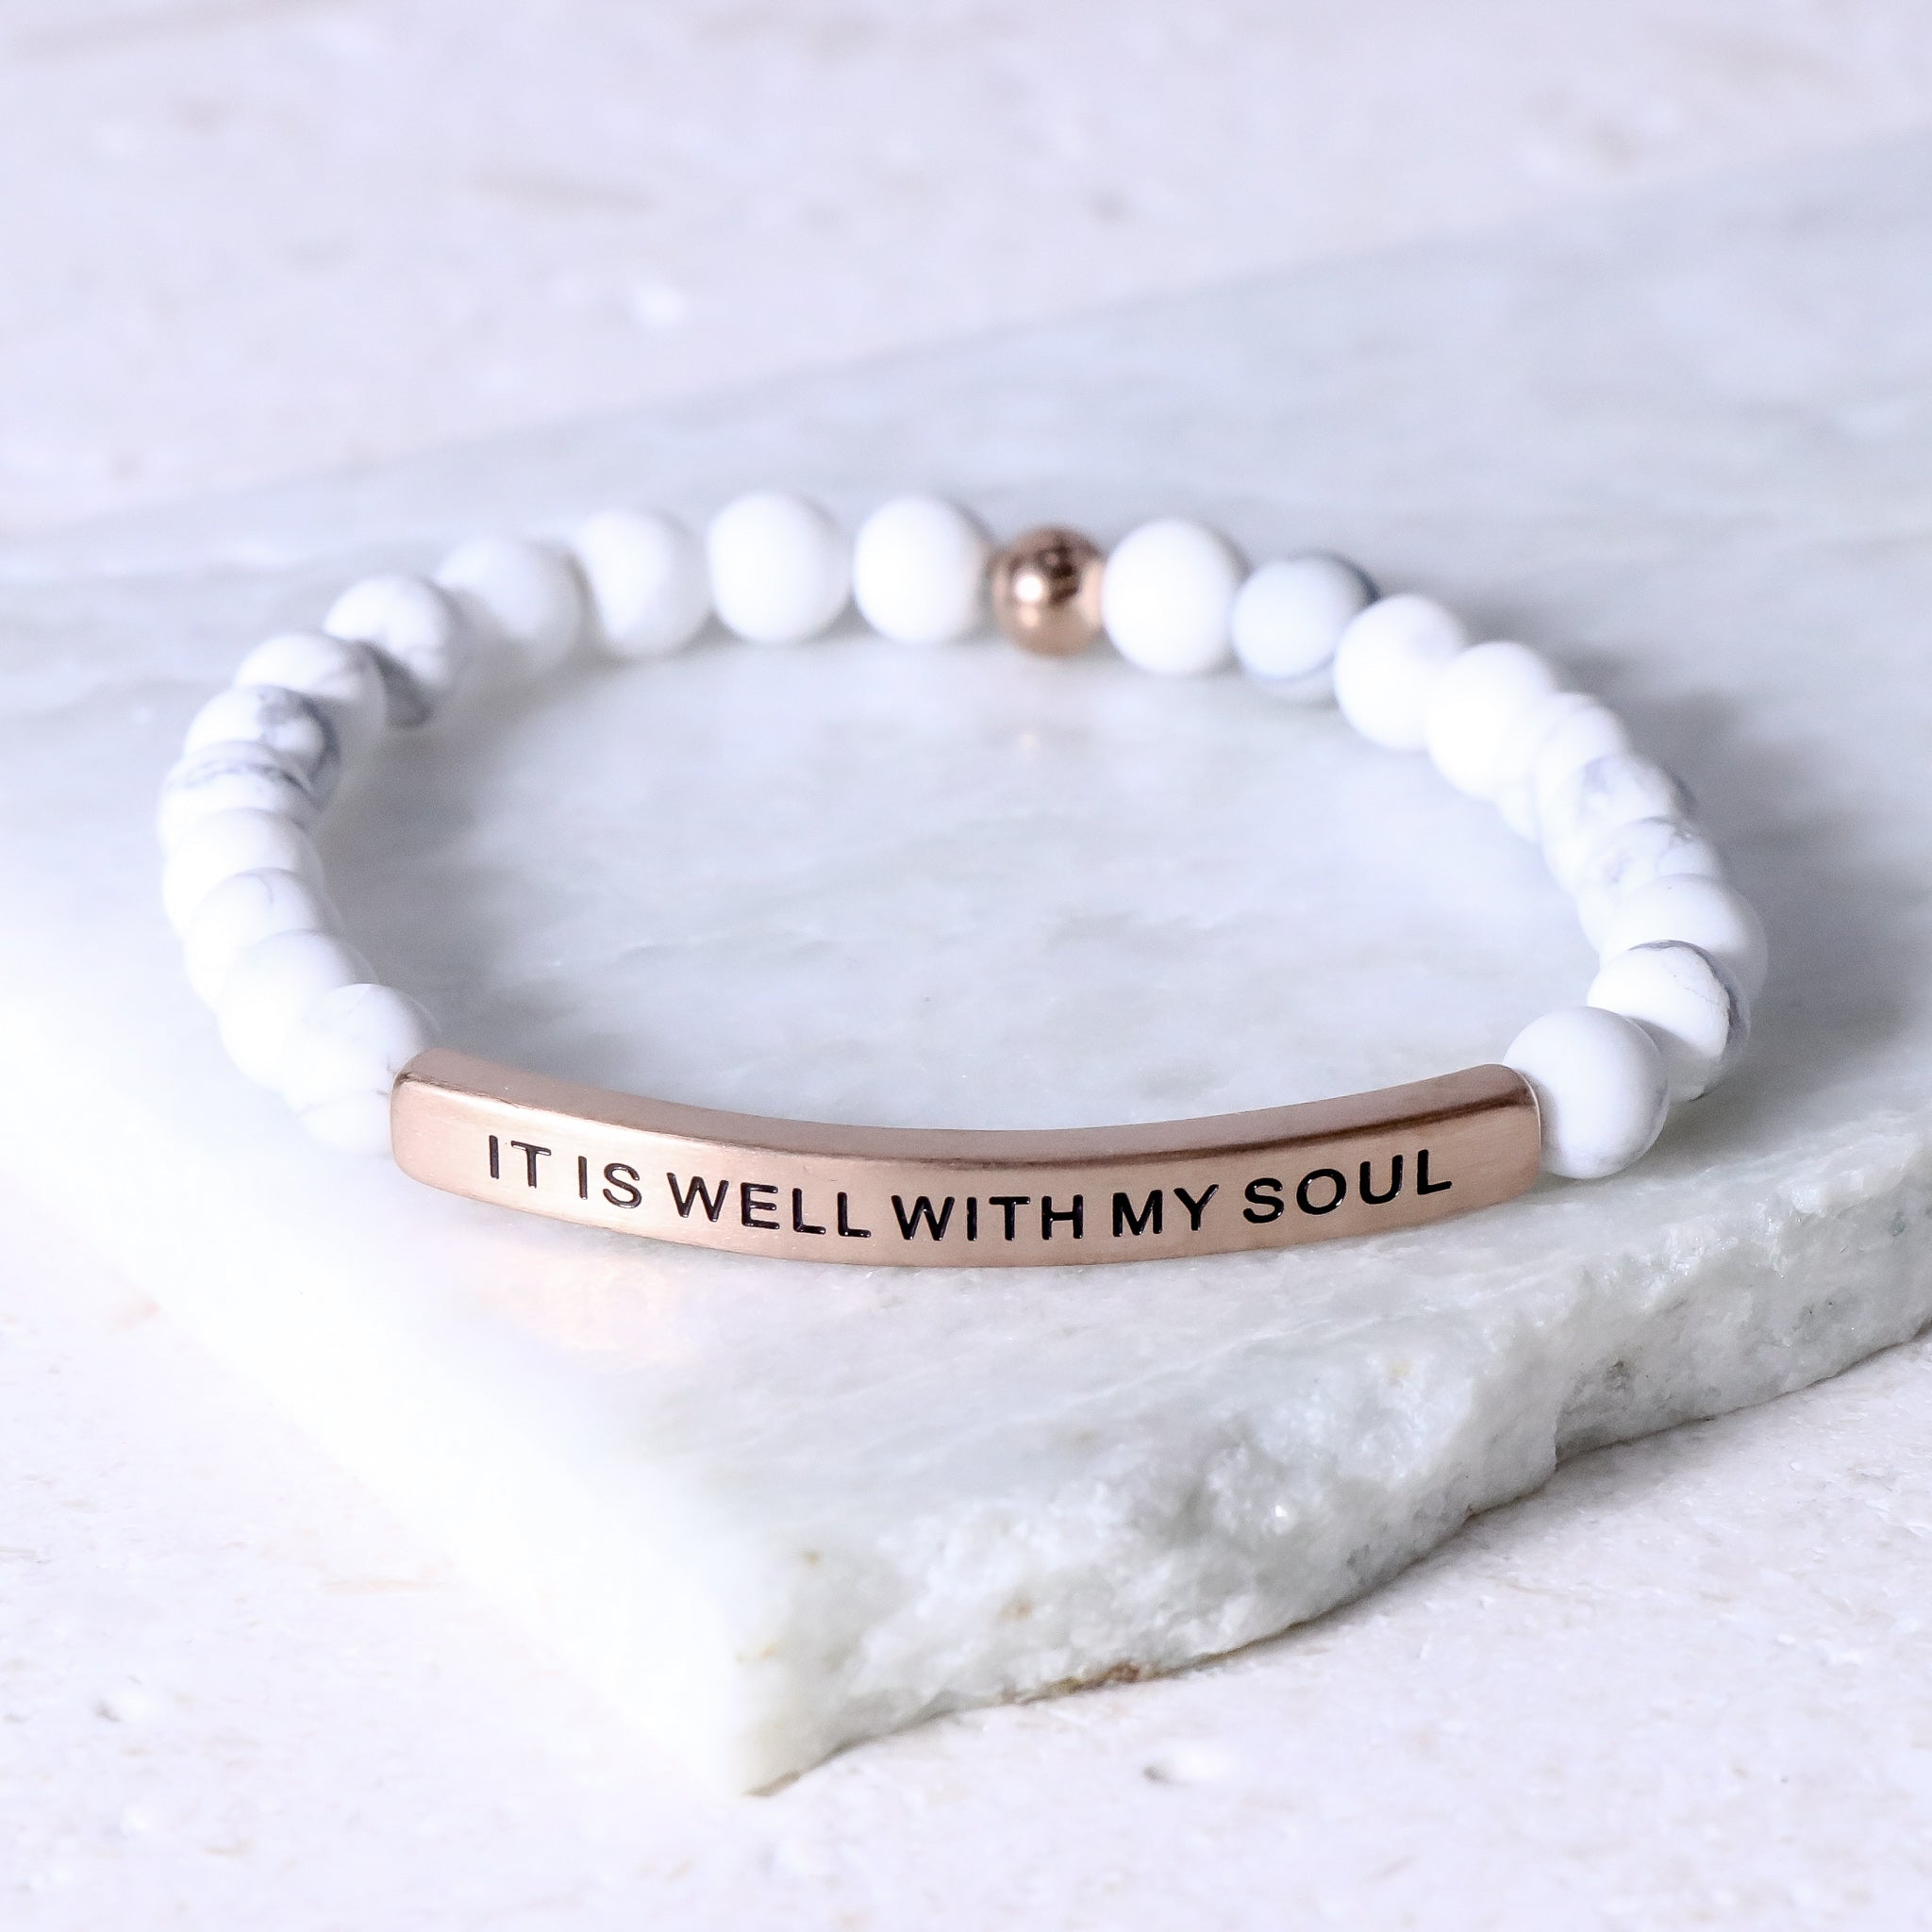 IT IS WELL WITH MY SOUL - Inspiration Co.